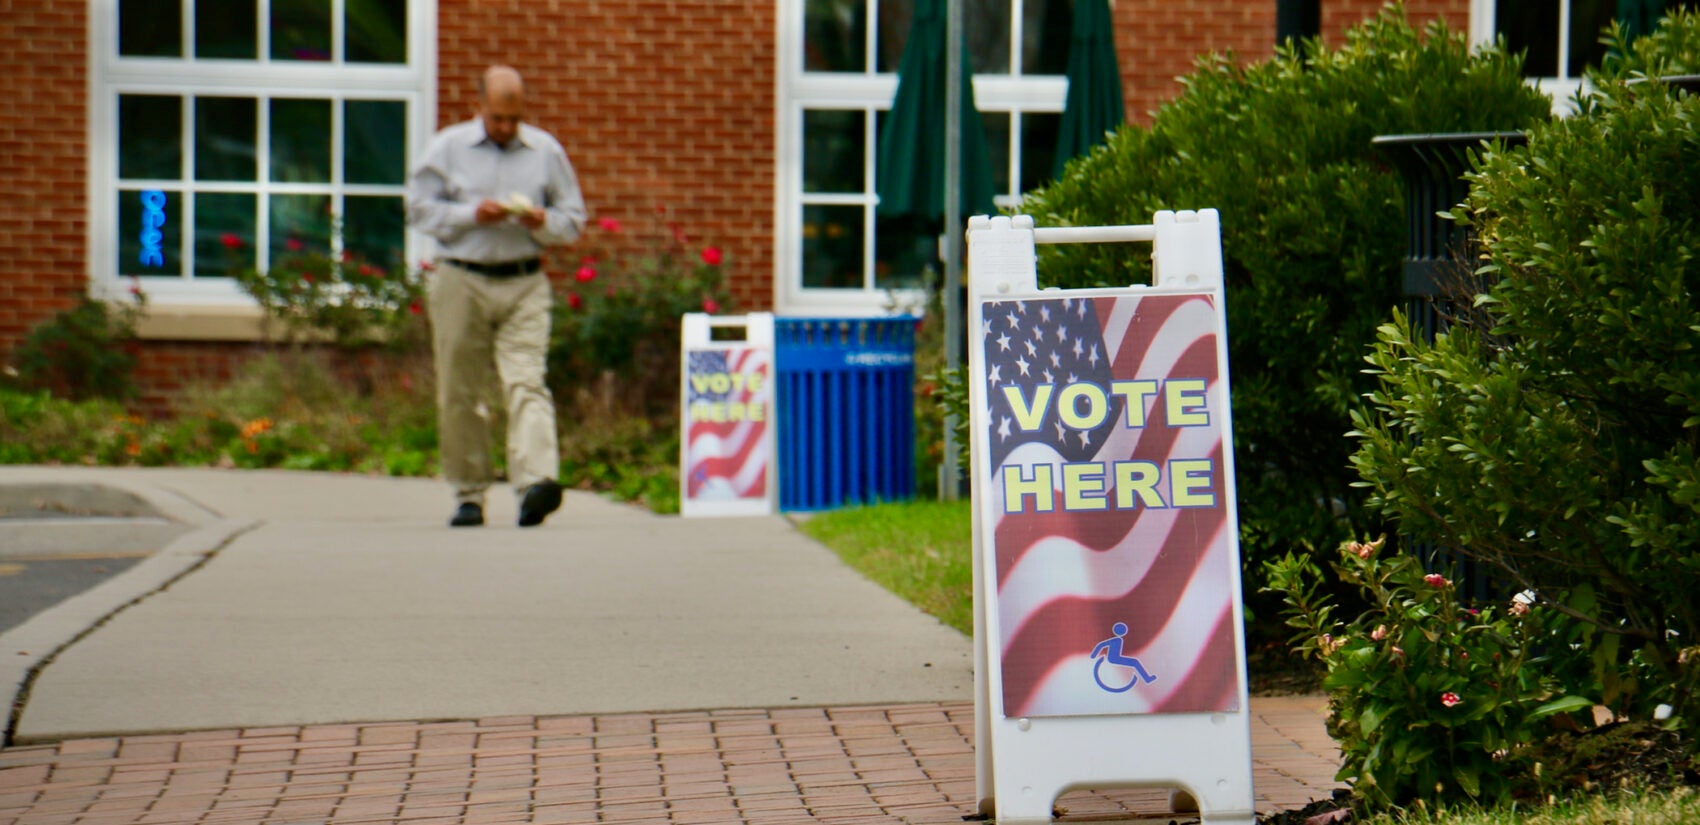 A polling place at Moorestown Township Town Hall in Burlington County, New Jersey.